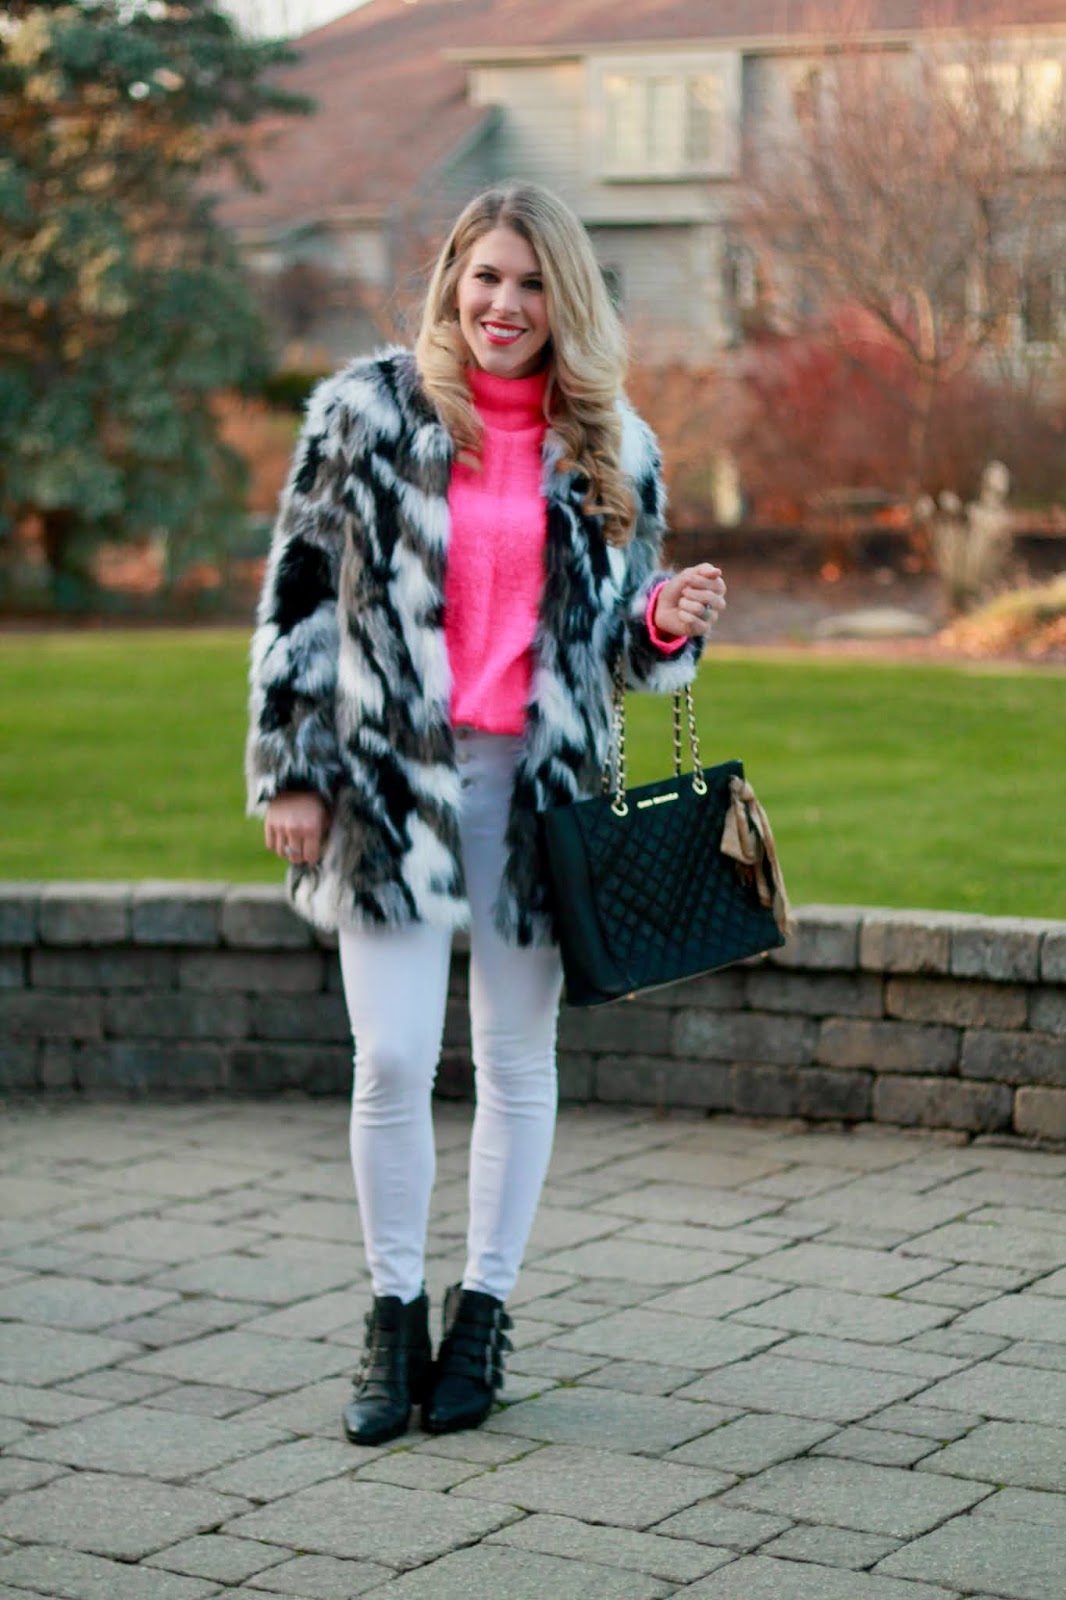 What? Faux Fur Coat Casually? & Confident Twosday Linkup